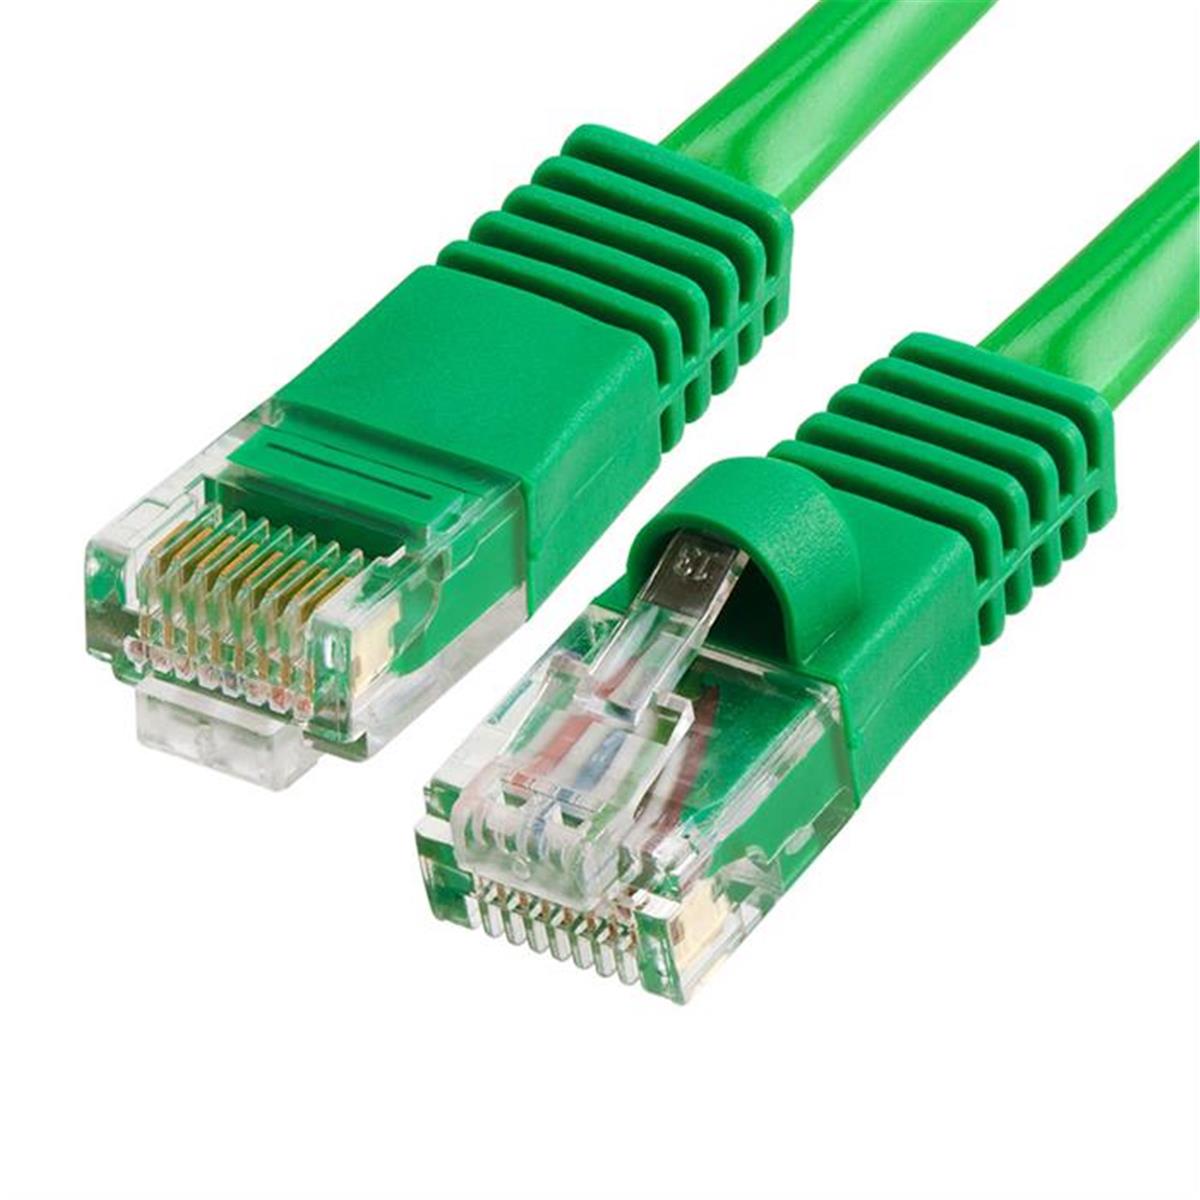 822-n 350 Mhz Rj45 Cat5e Ethernet Network Patch Cable - 5 Ft. - Green